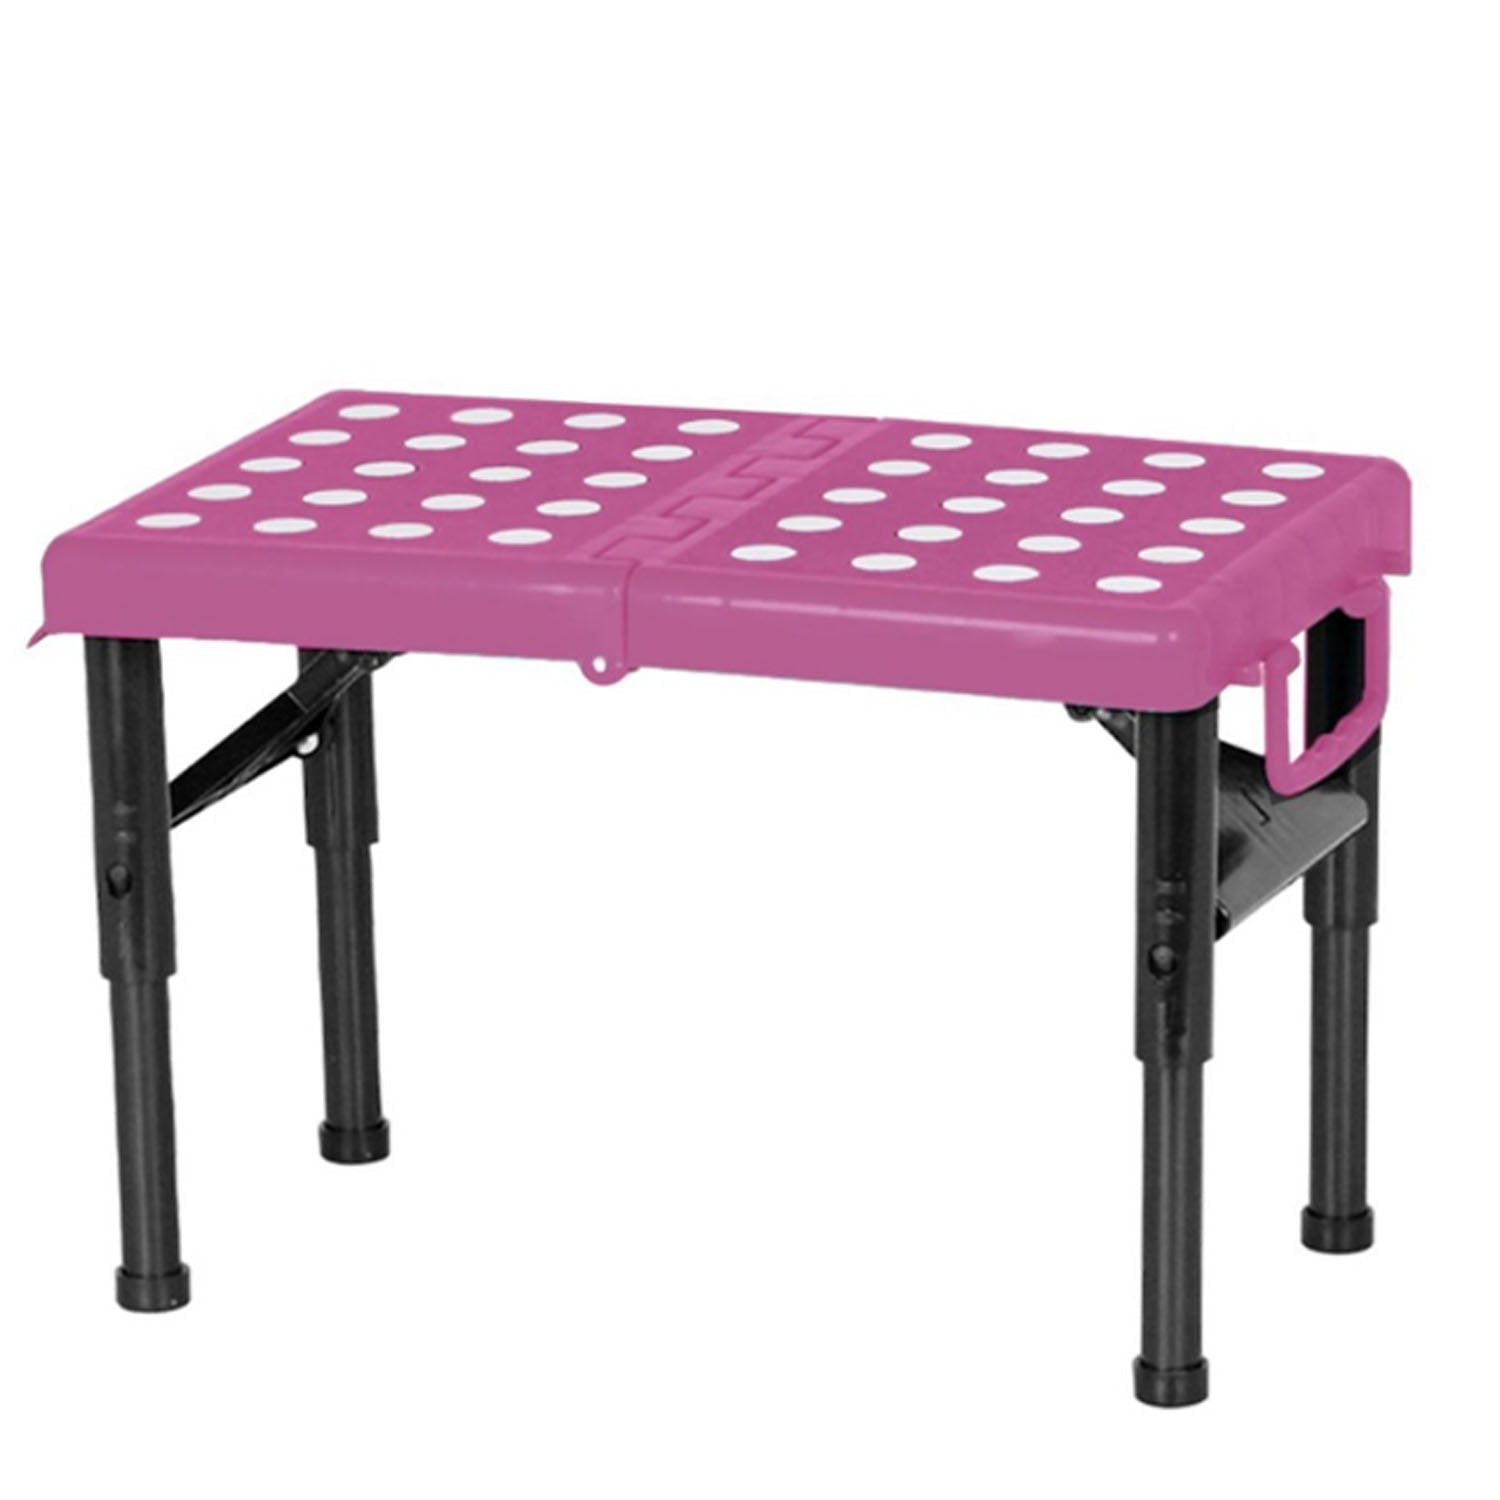 2431 High Quality Multi-Utility Compact Foldable Table 